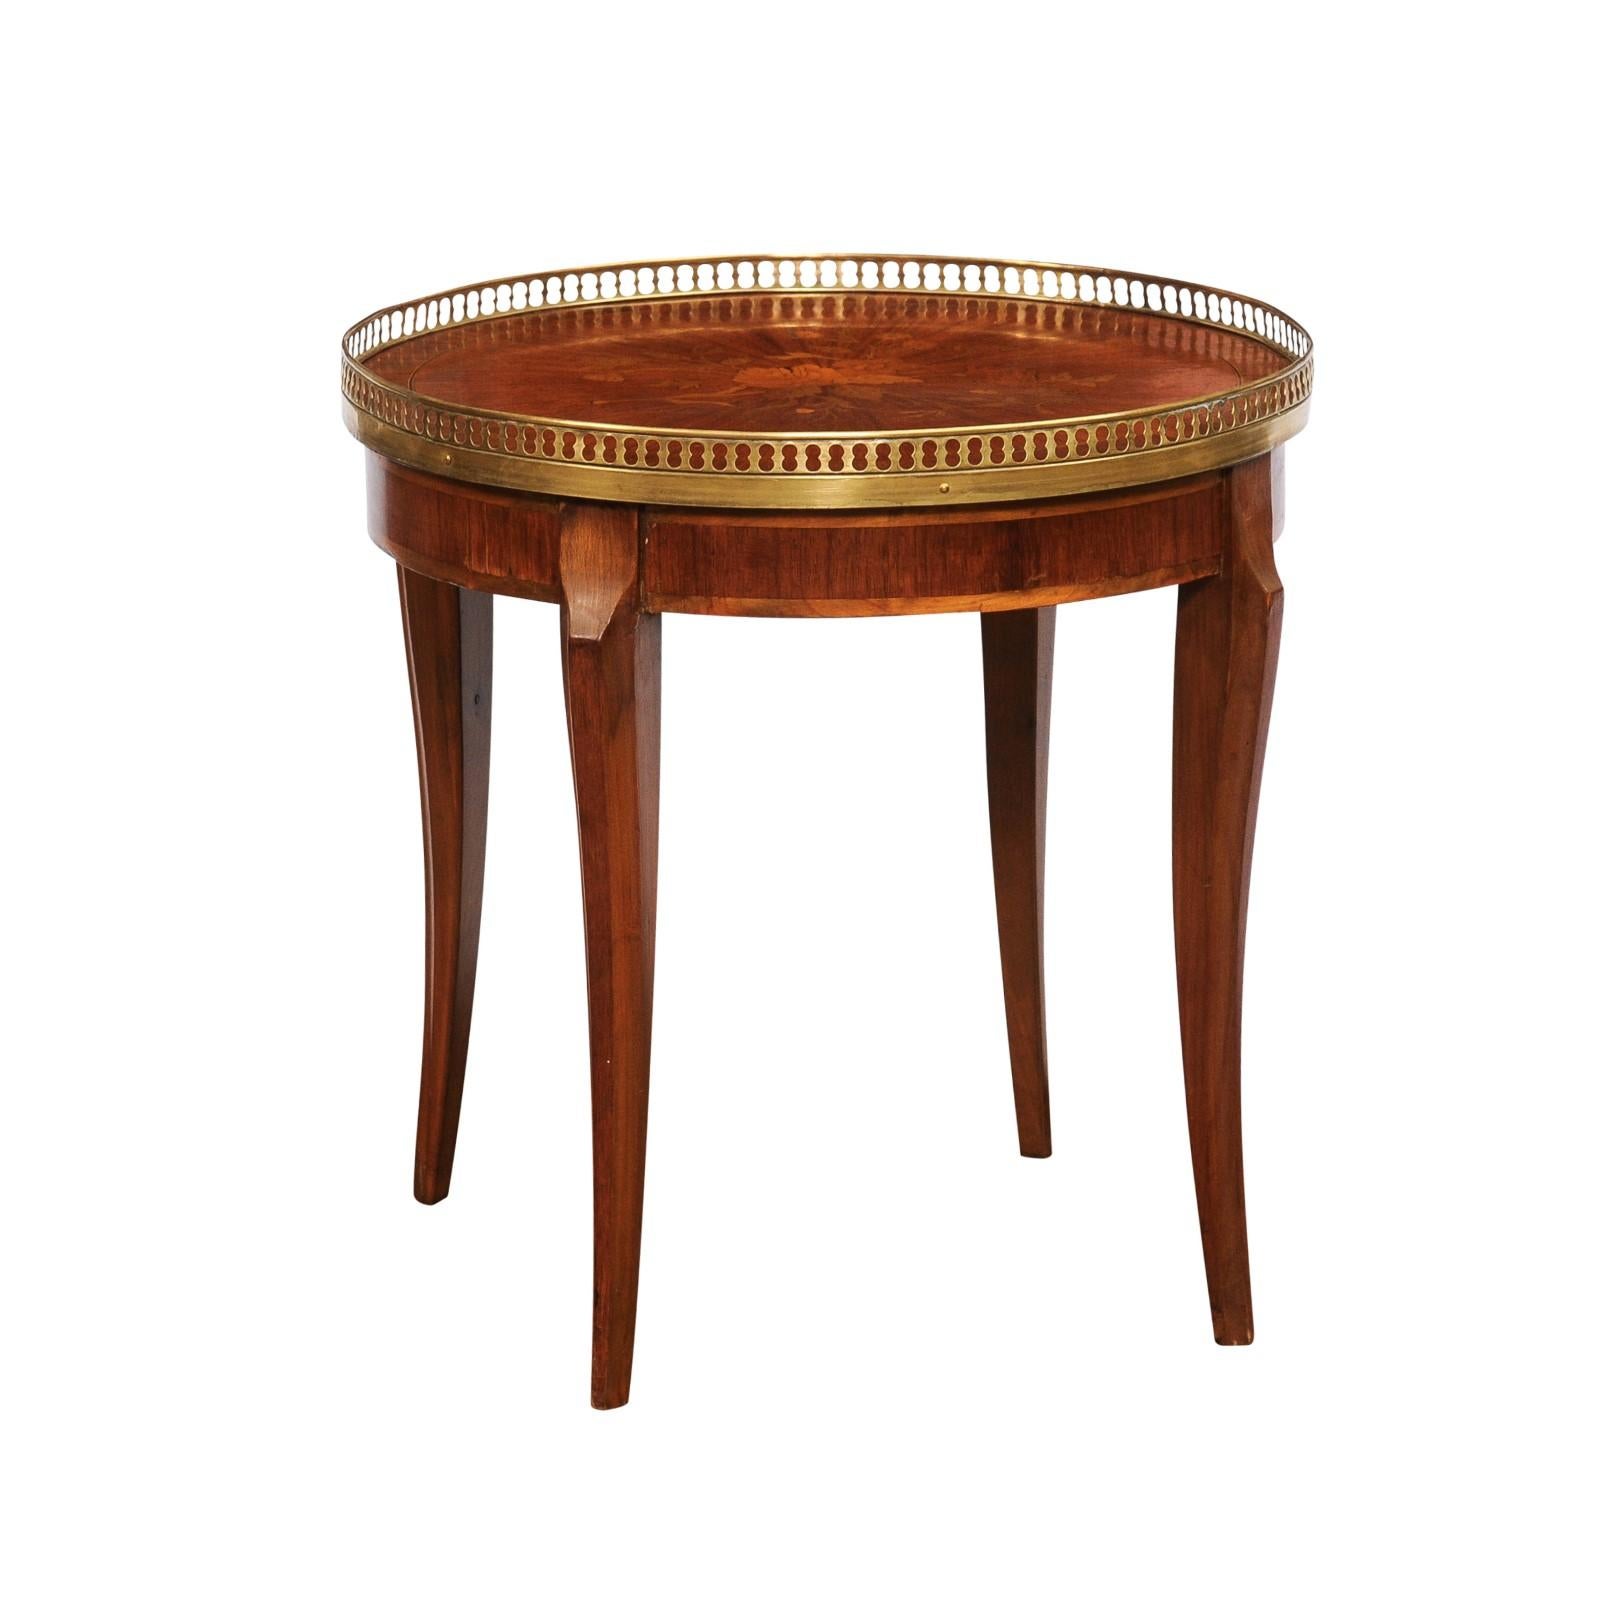 A French walnut, cherry and mahogany bouillotte game table with marquetry top, pierced brass gallery, cross banding and slightly saber legs. Experience the elegance of French craftsmanship with this 20th-century walnut, cherry, and mahogany